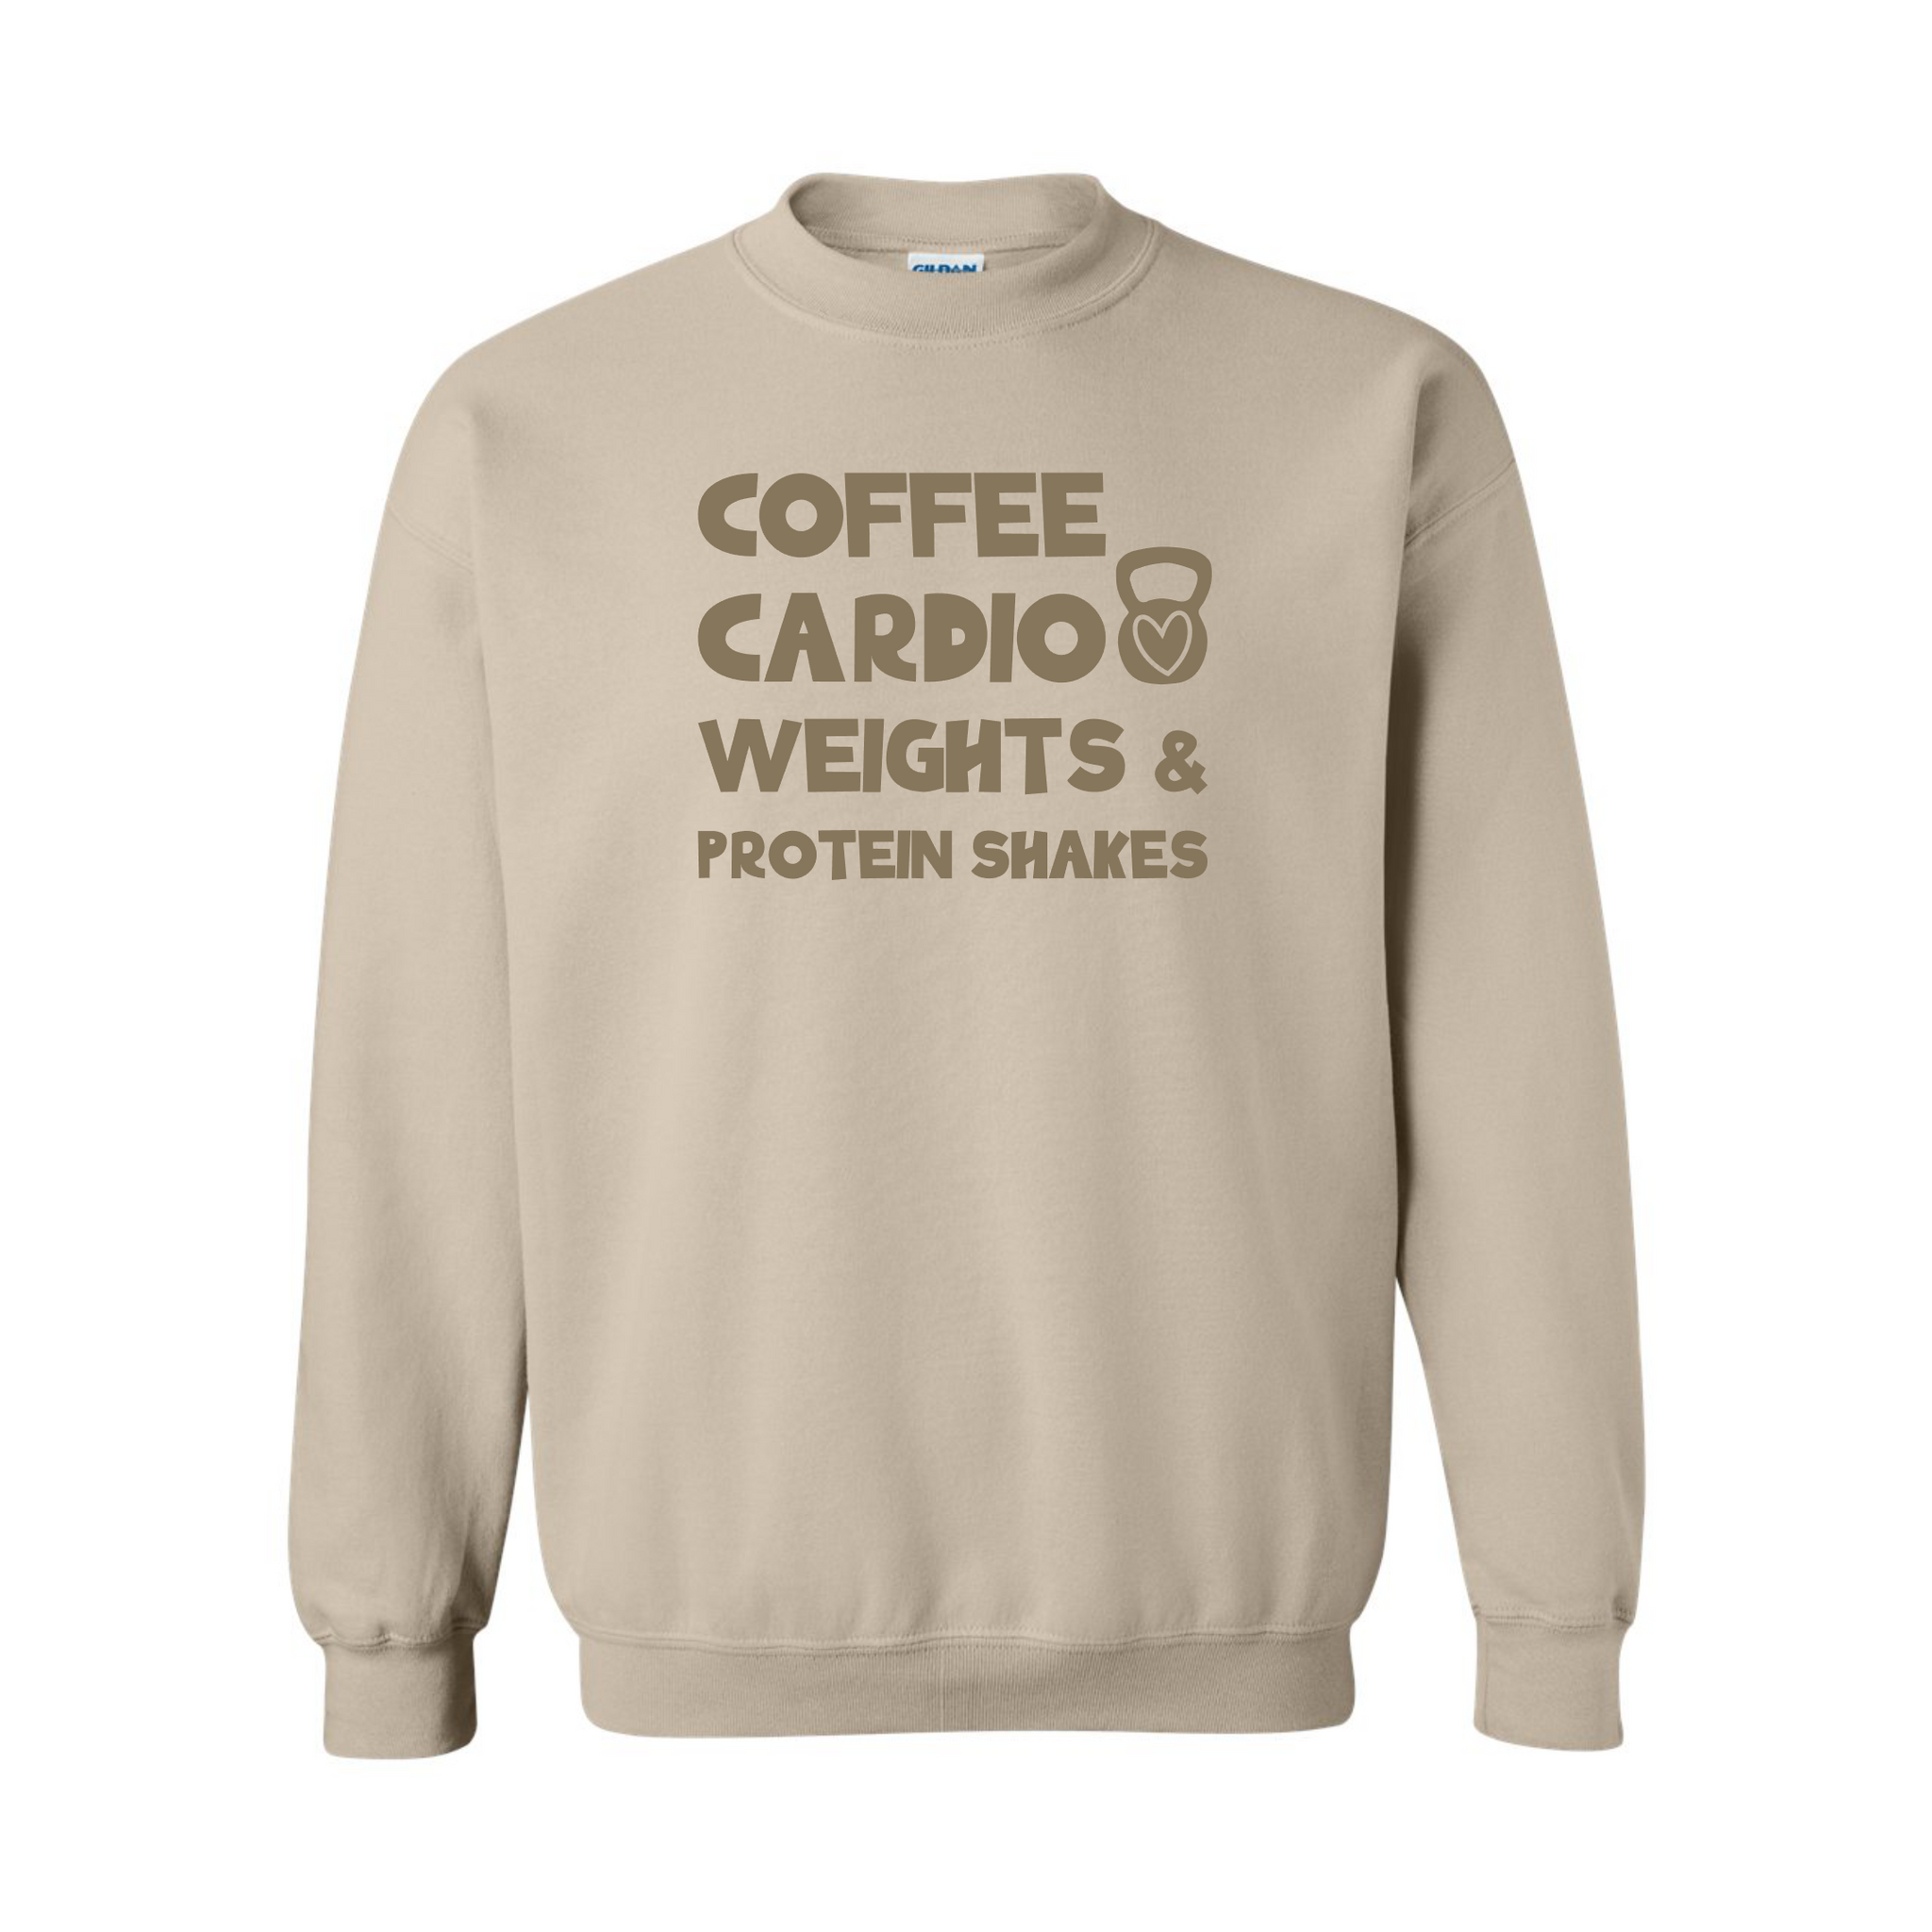 Coffee Cardio Weights and Protein Shakes - Sand Sweatshirt - Adult & Women's Gym Top - S006